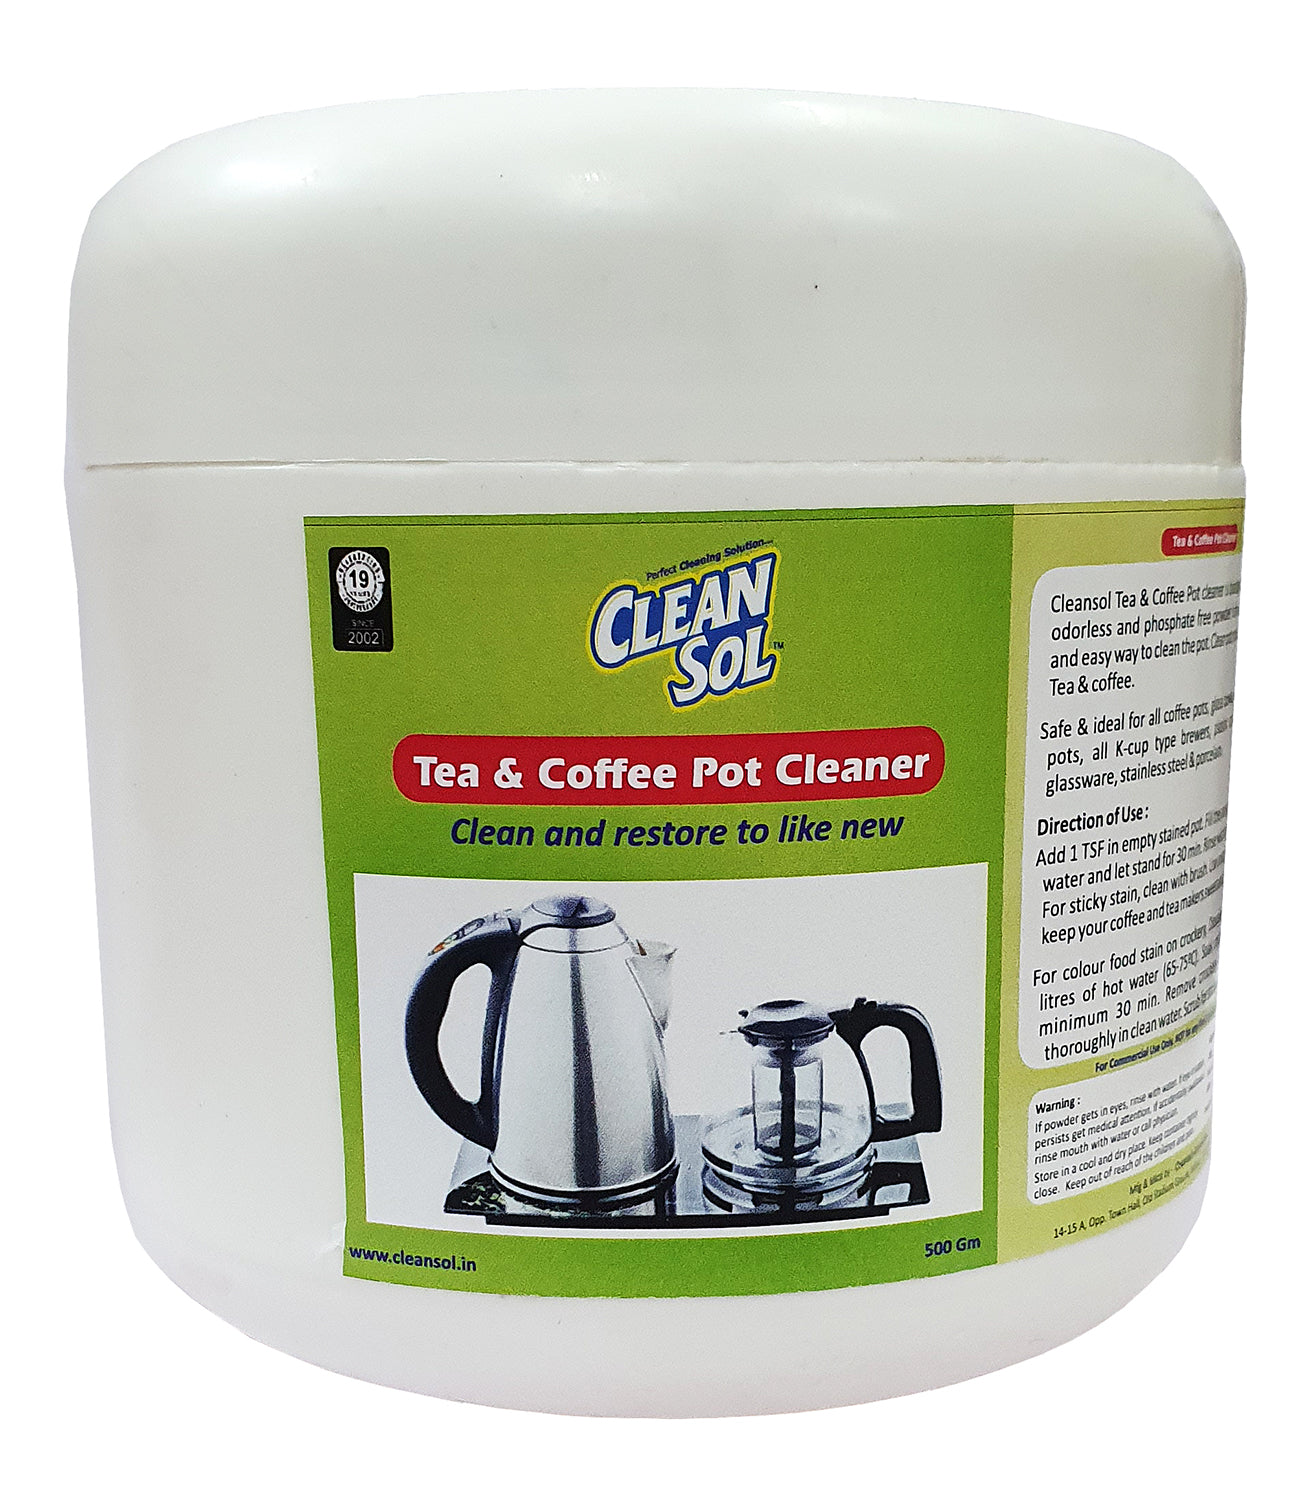 Cleansol Tea & Coffee Stain Pot Cleaner powder – 500 Gram